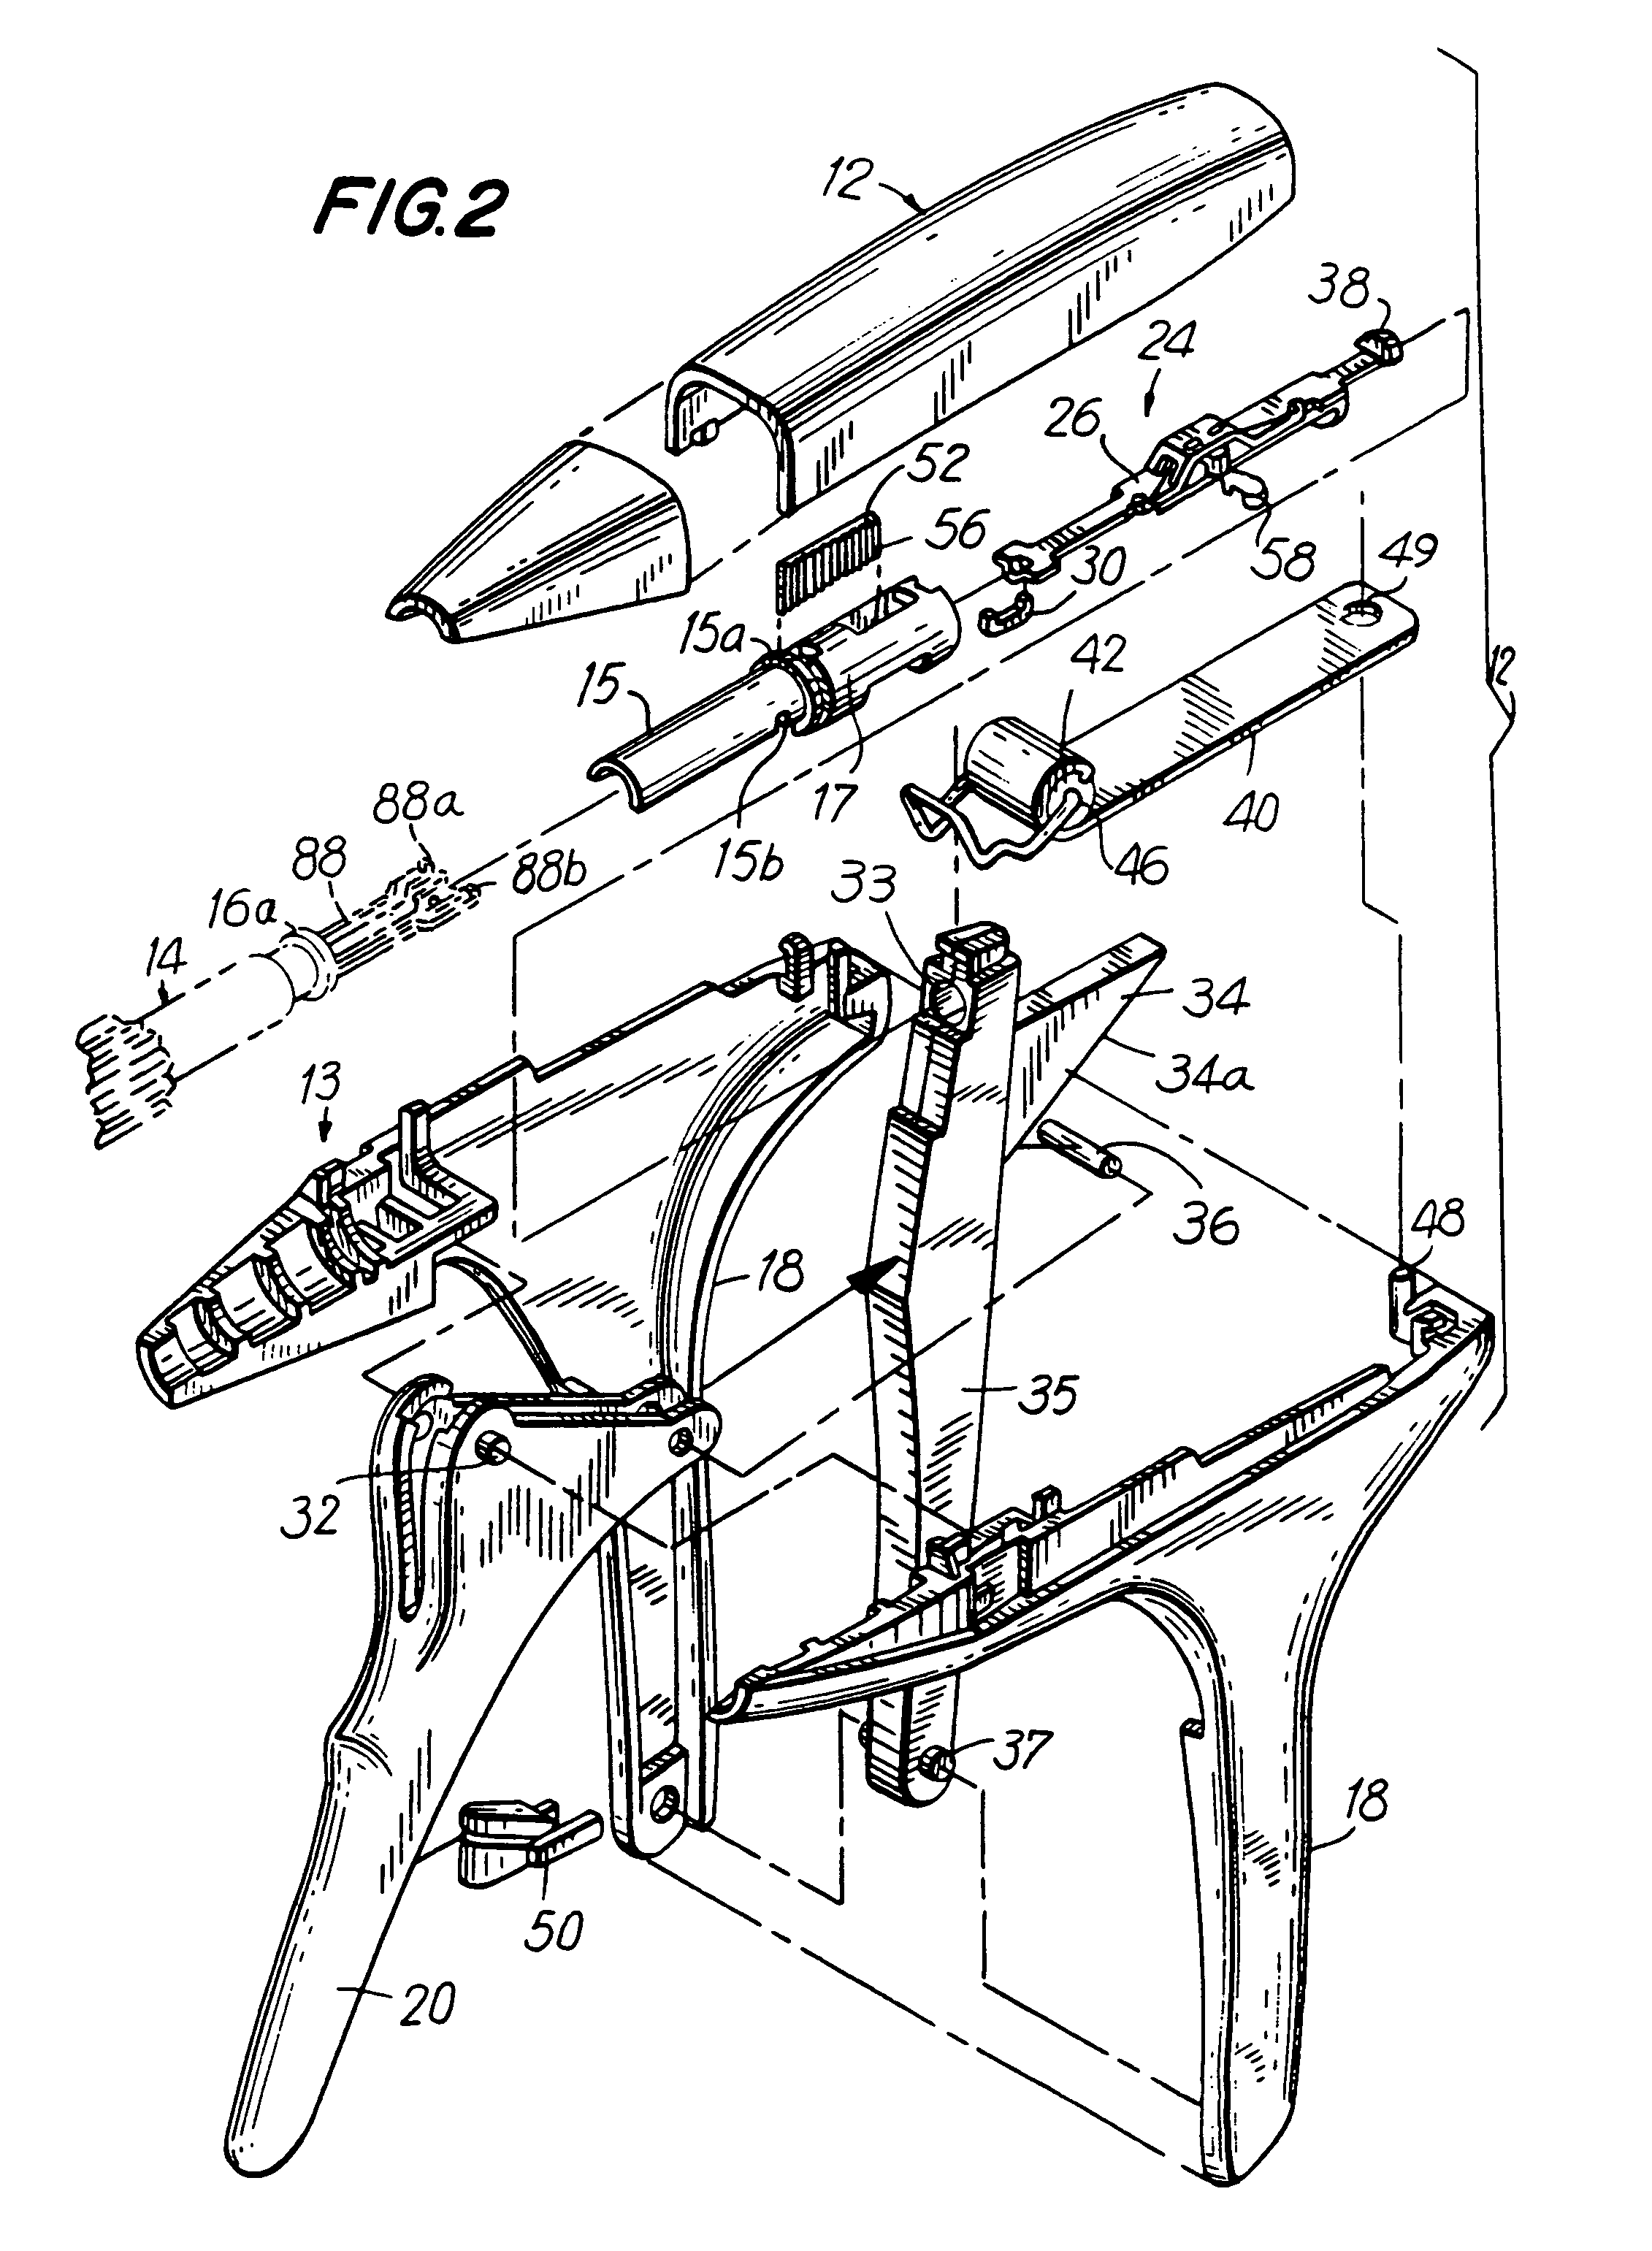 Apparatus for applying surgical fastners to body tissue